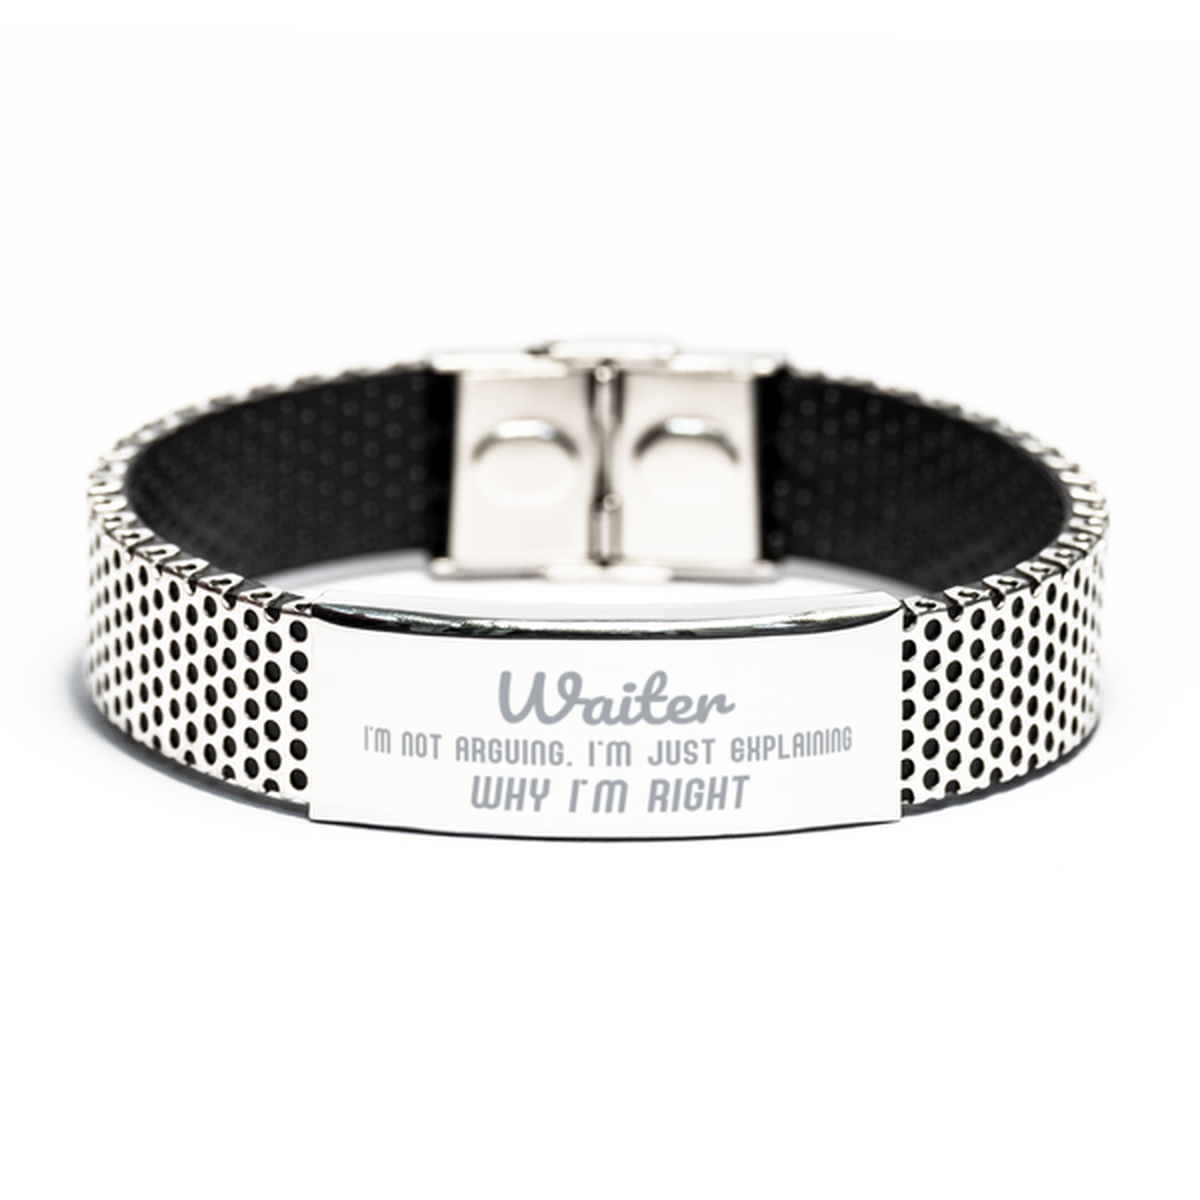 Waiter I'm not Arguing. I'm Just Explaining Why I'm RIGHT Stainless Steel Bracelet, Funny Saying Quote Waiter Gifts For Waiter Graduation Birthday Christmas Gifts for Men Women Coworker